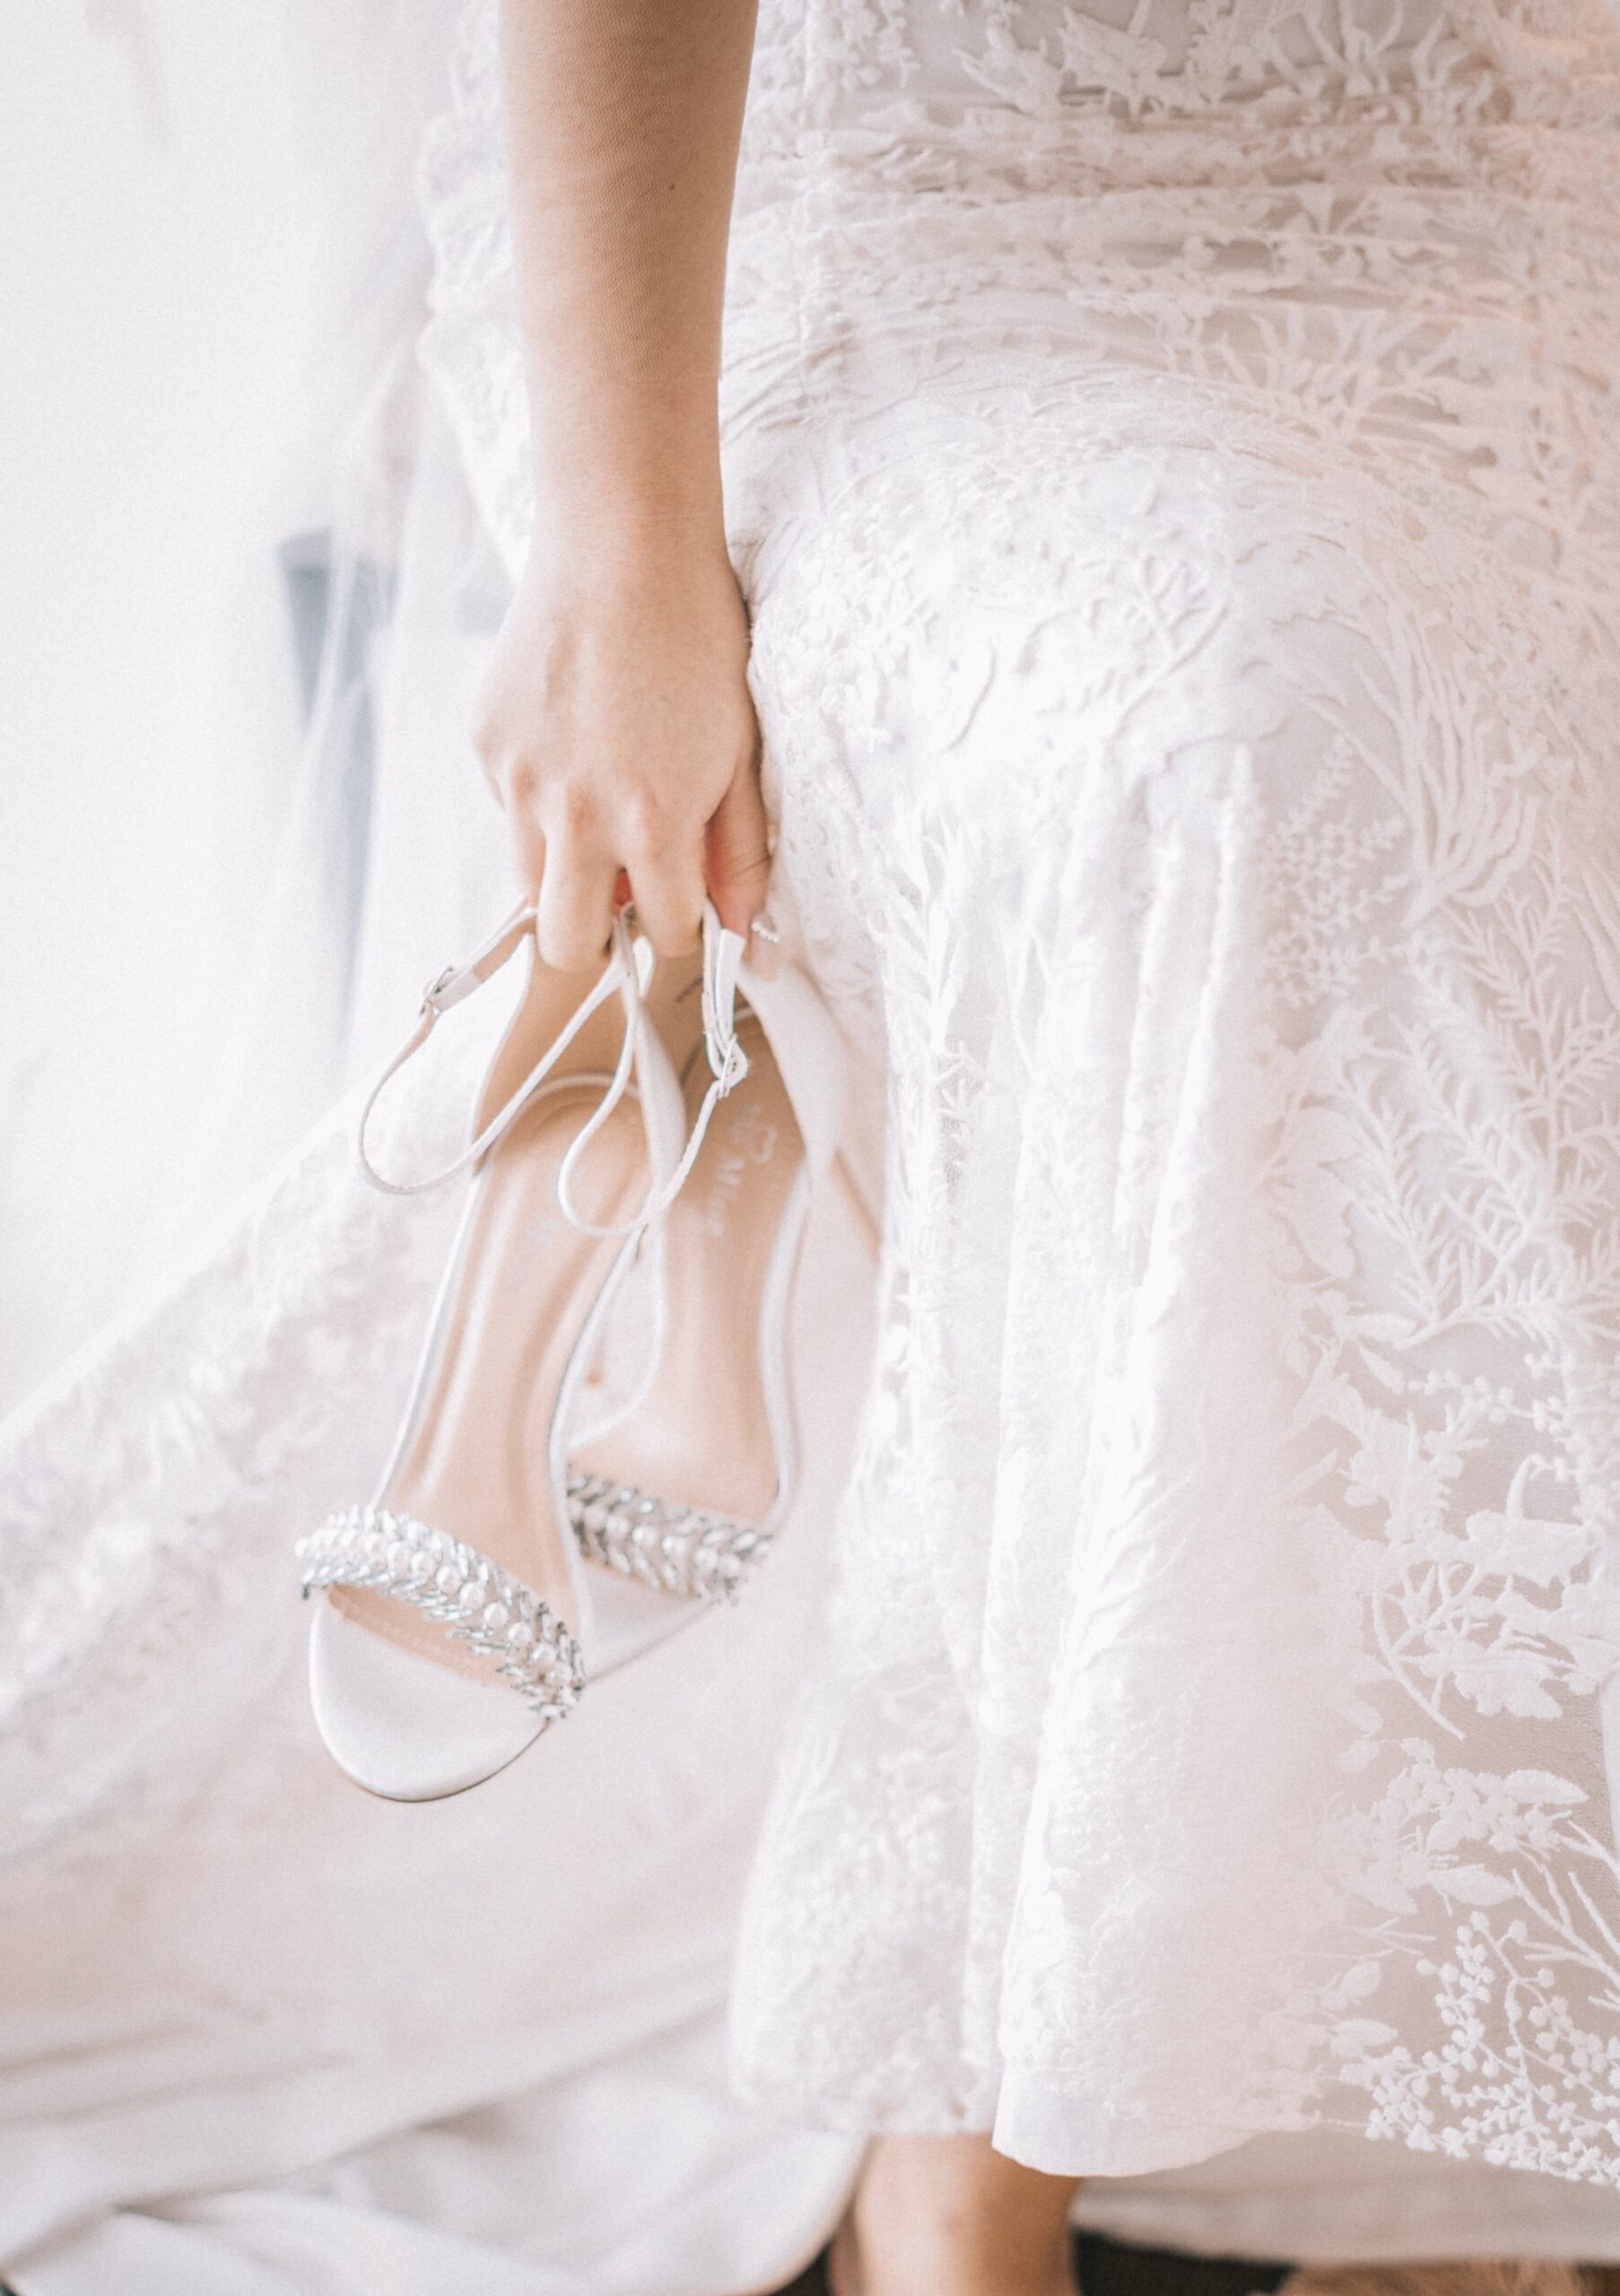 Hand holding heels with a wedding dress